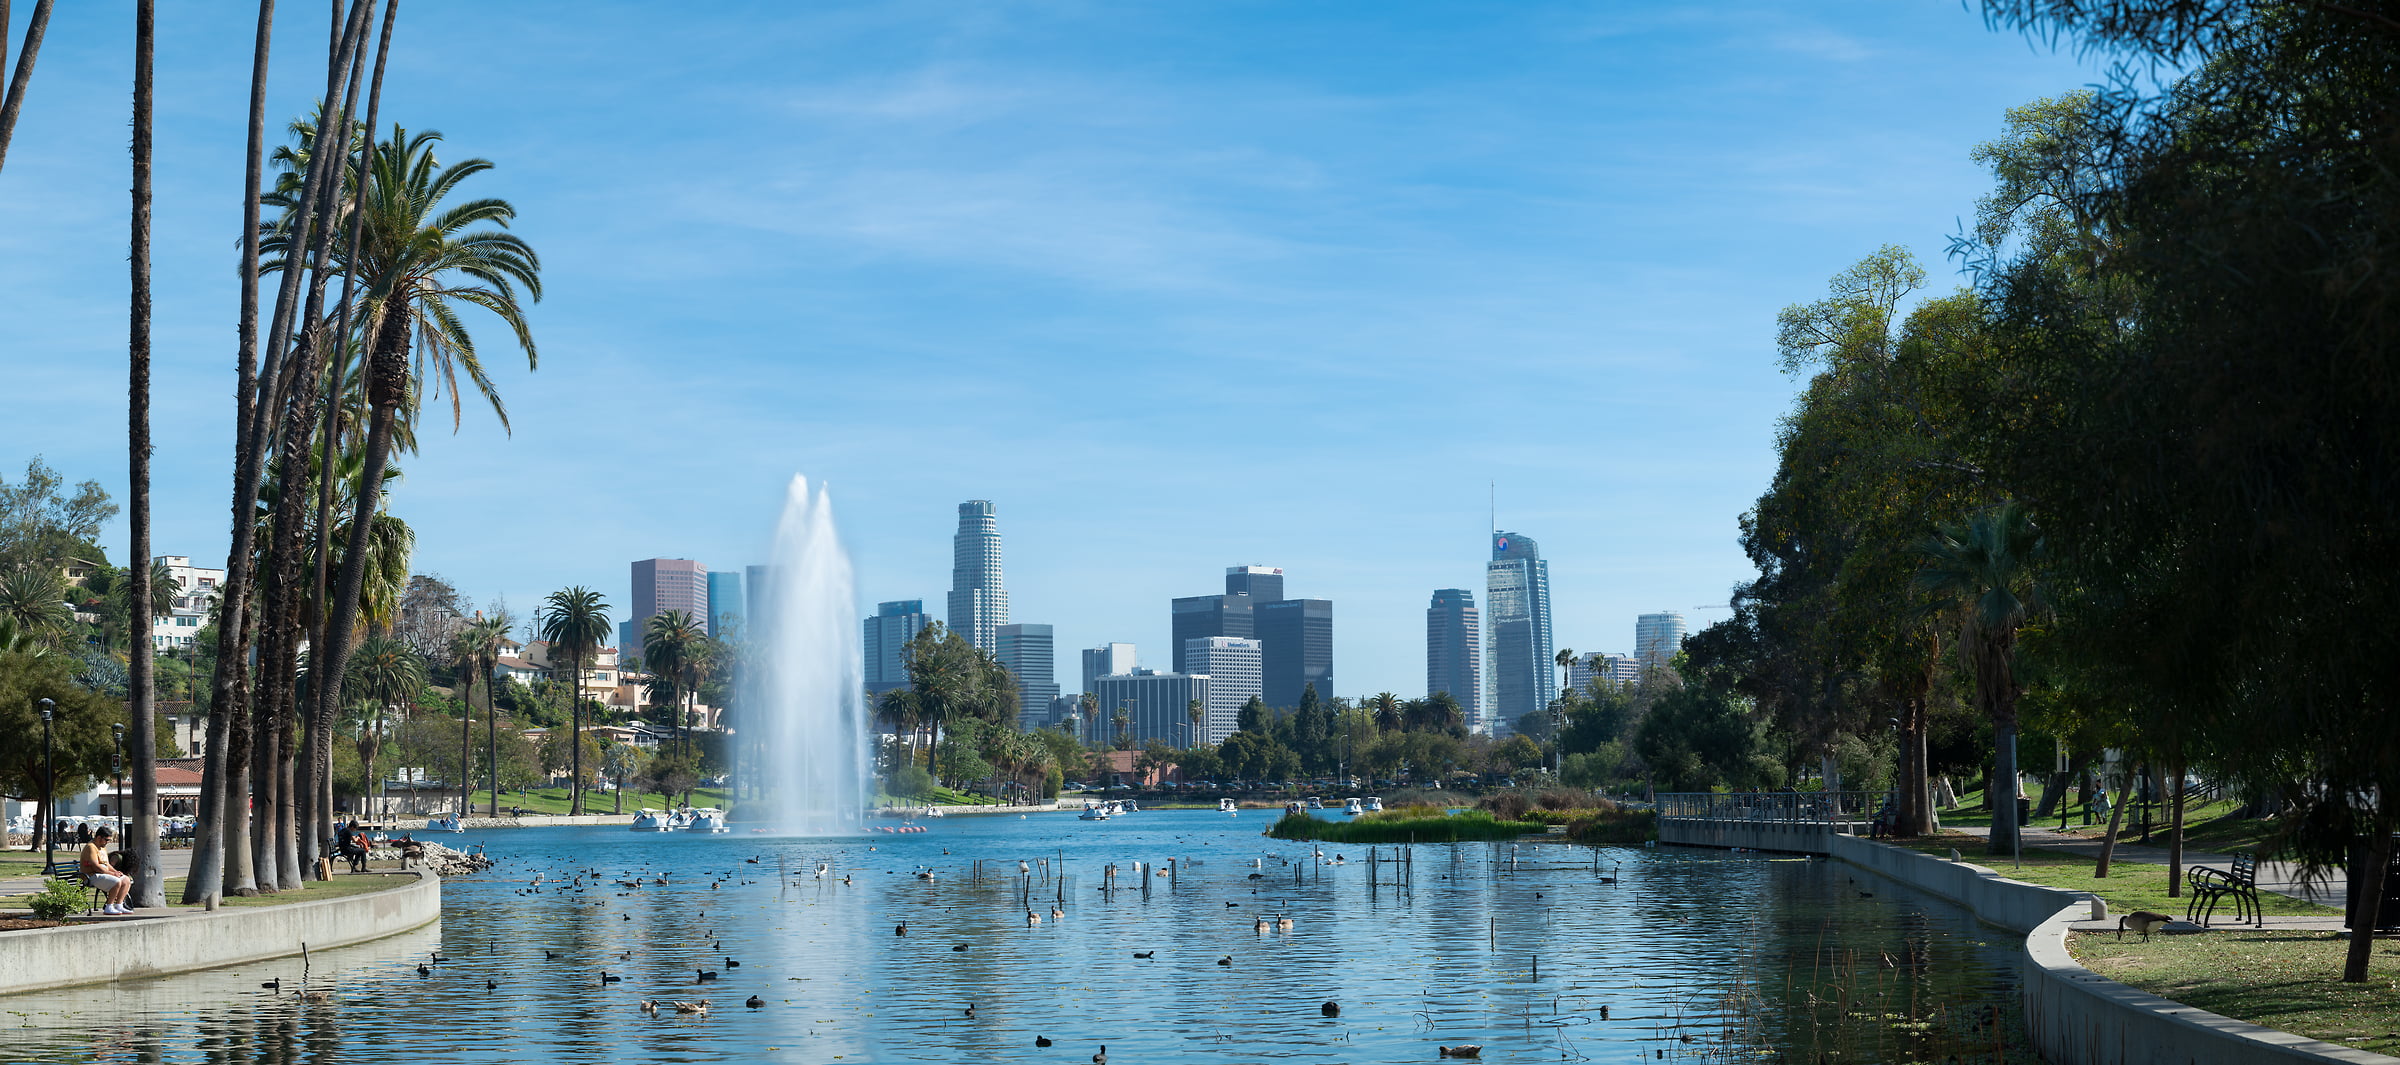 303 megapixels! A very high resolution, large-format VAST photo print of Echo Park in los Angeles; photograph created by Greg Probst in Los Angeles, California